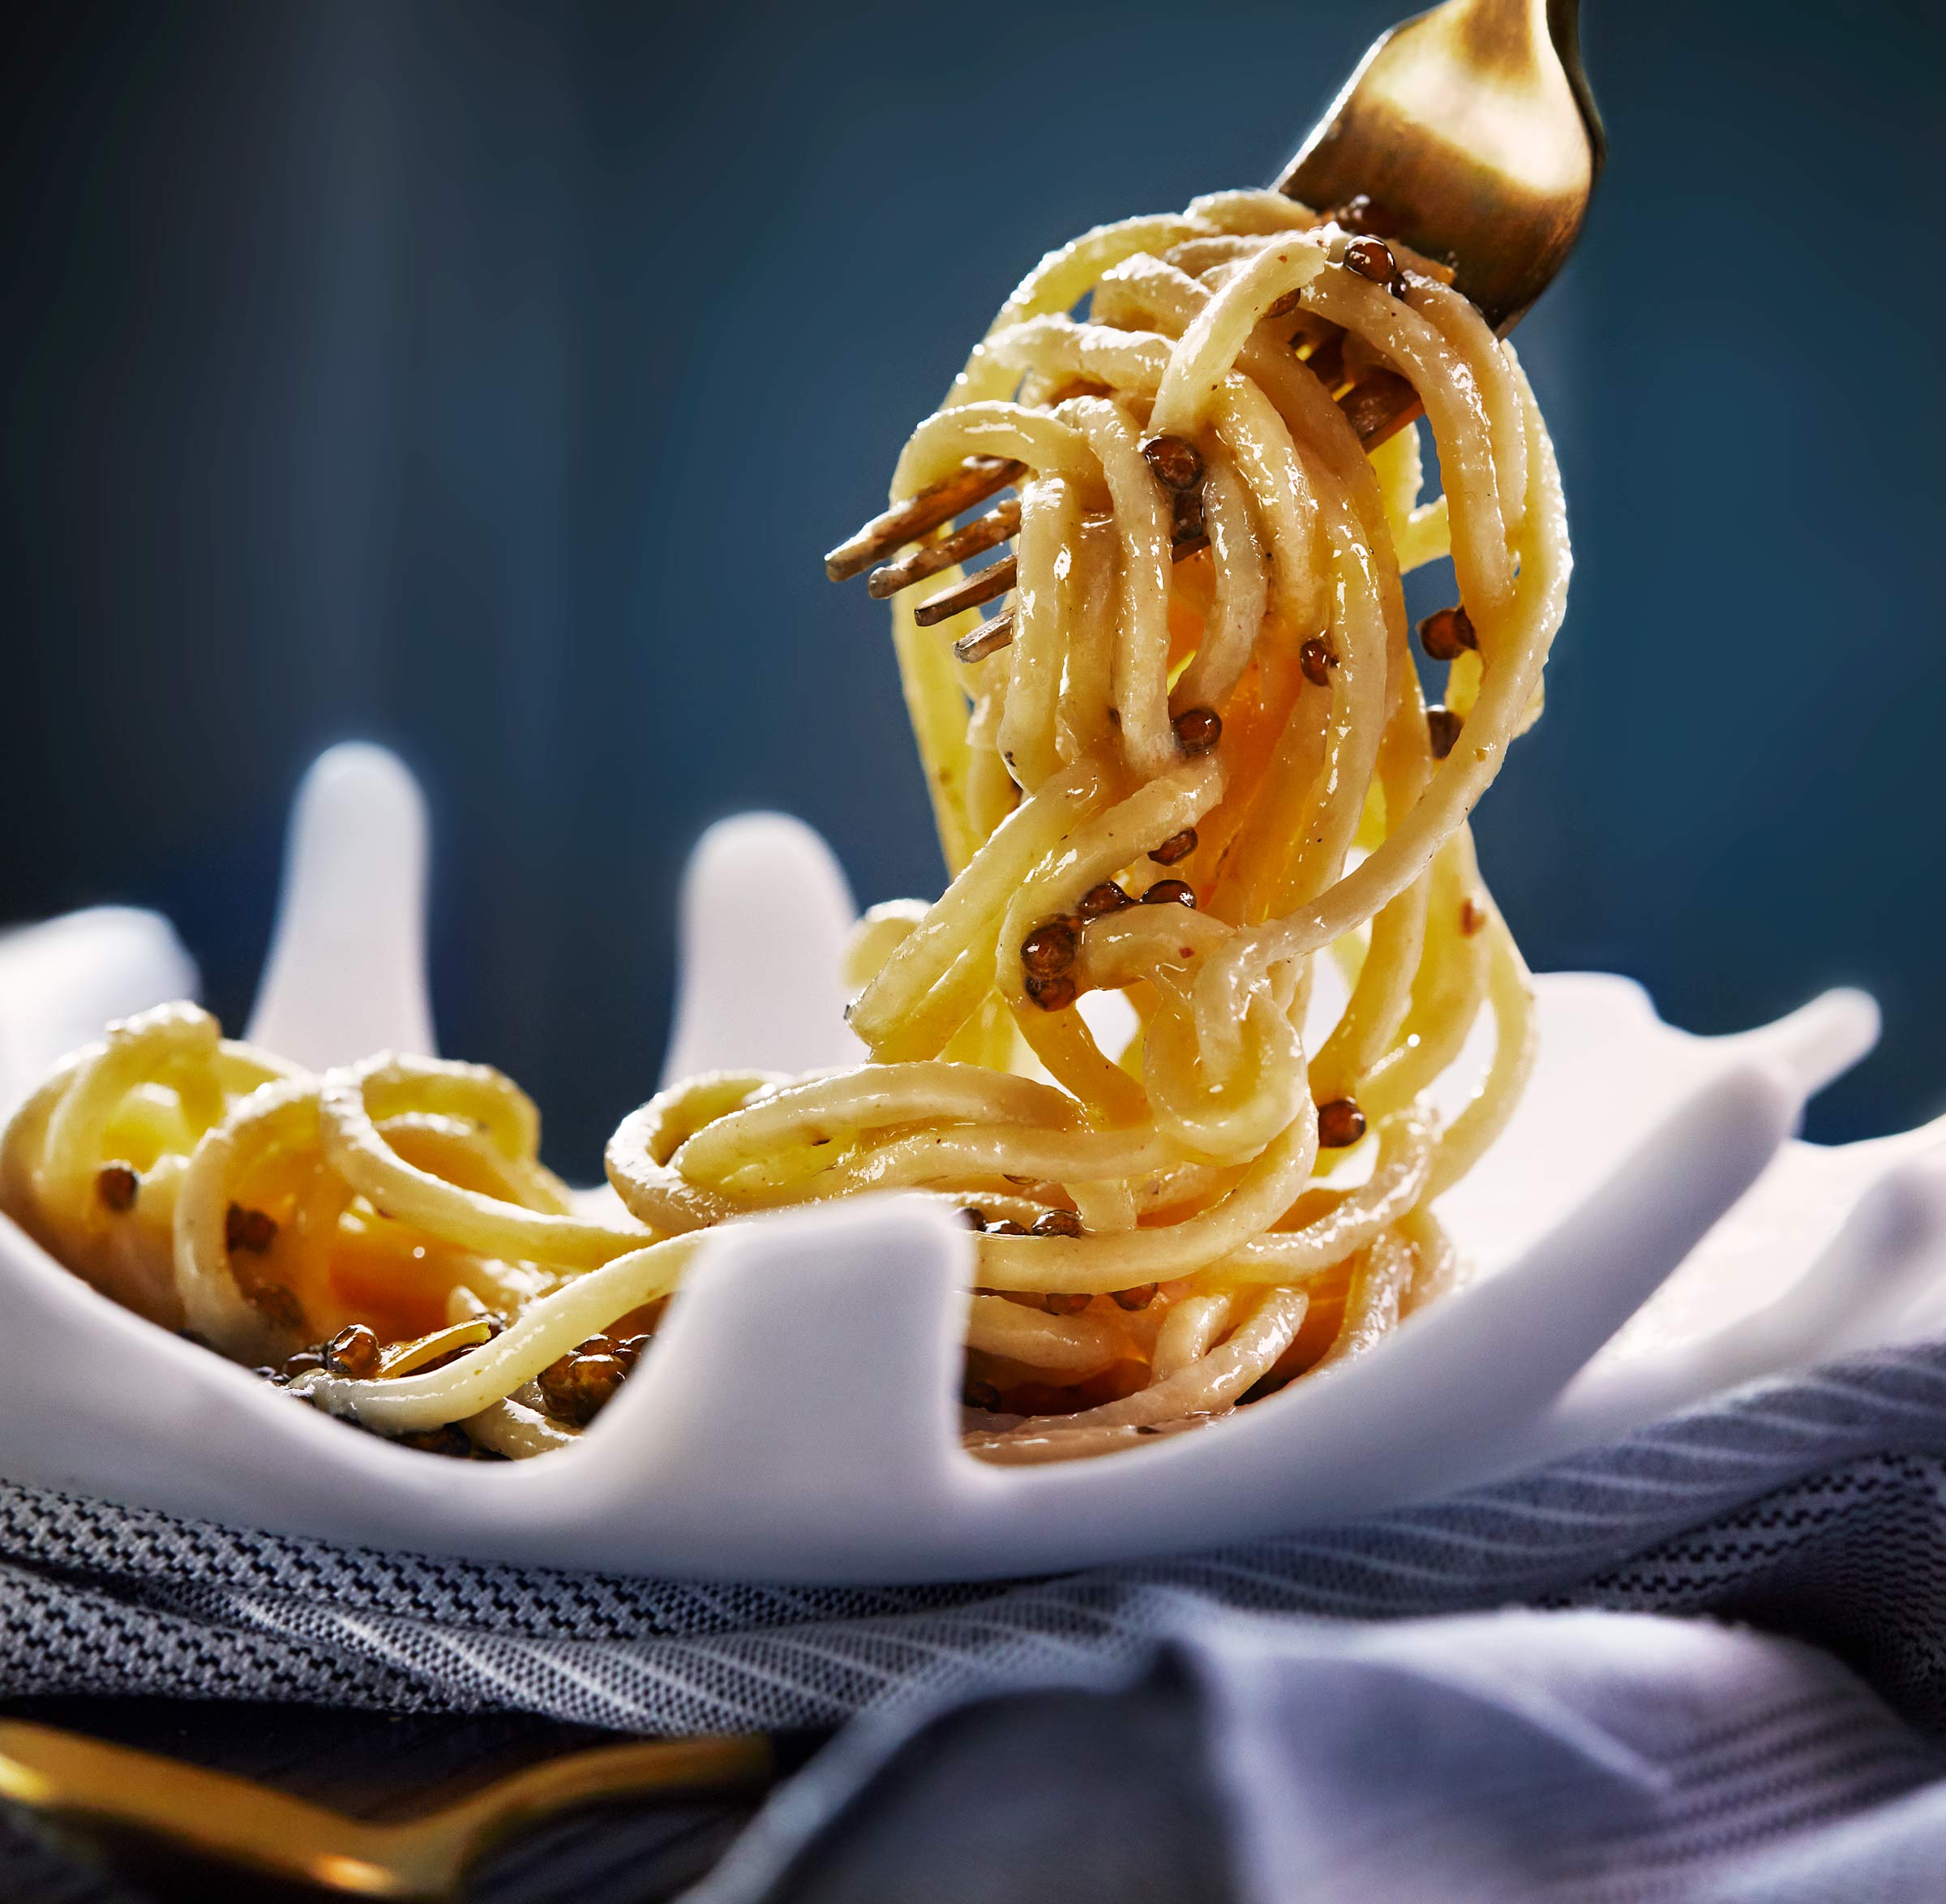 Spaghetti with cultured butter, oyster and burnt calamari broth with Kaluga caviar